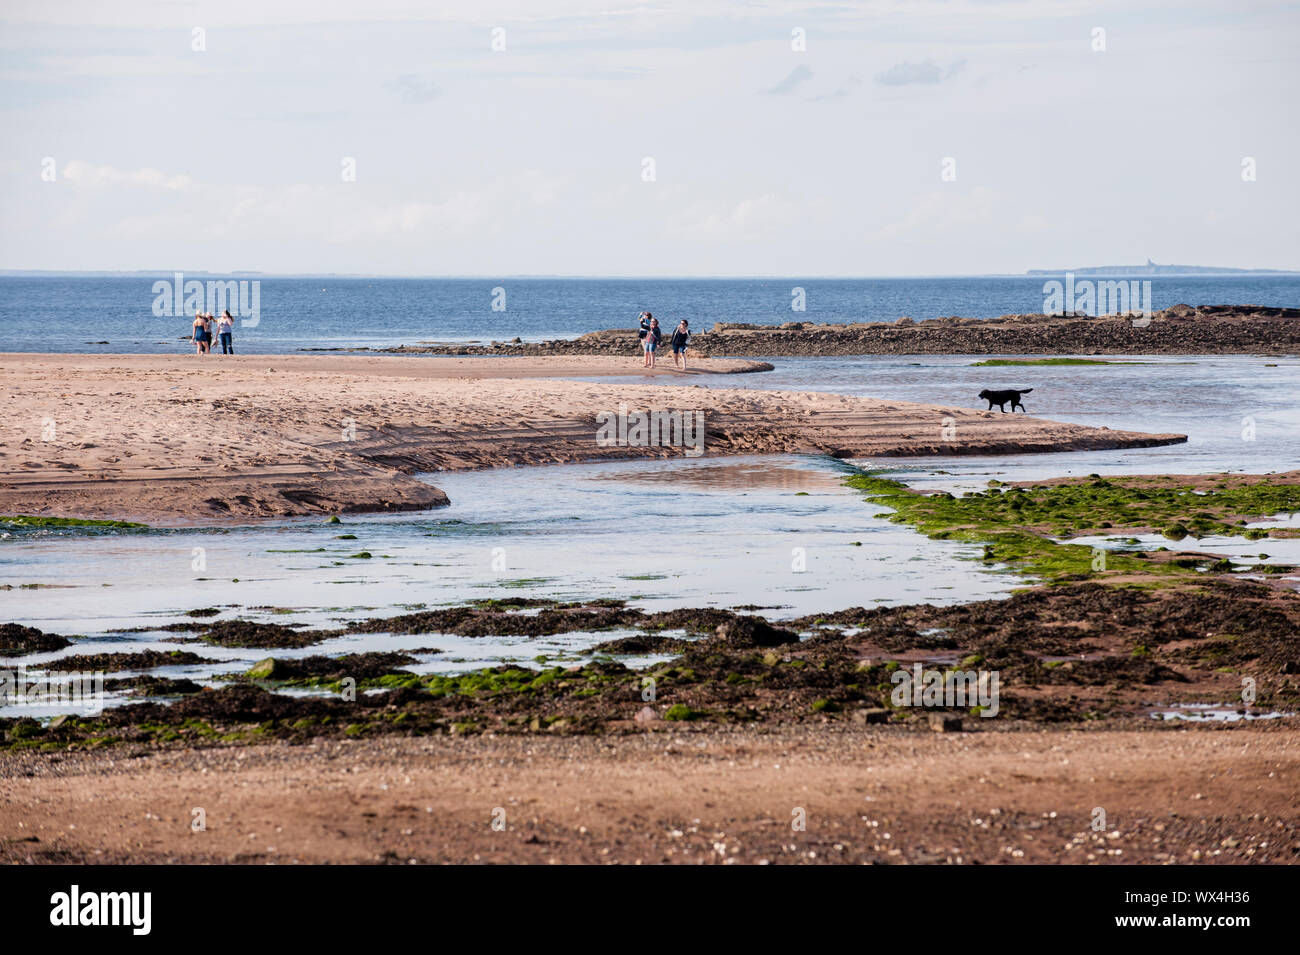 Belhaven bay in Dundar. Dunbar is a town located in the south-east of Scotland. Stock Photo